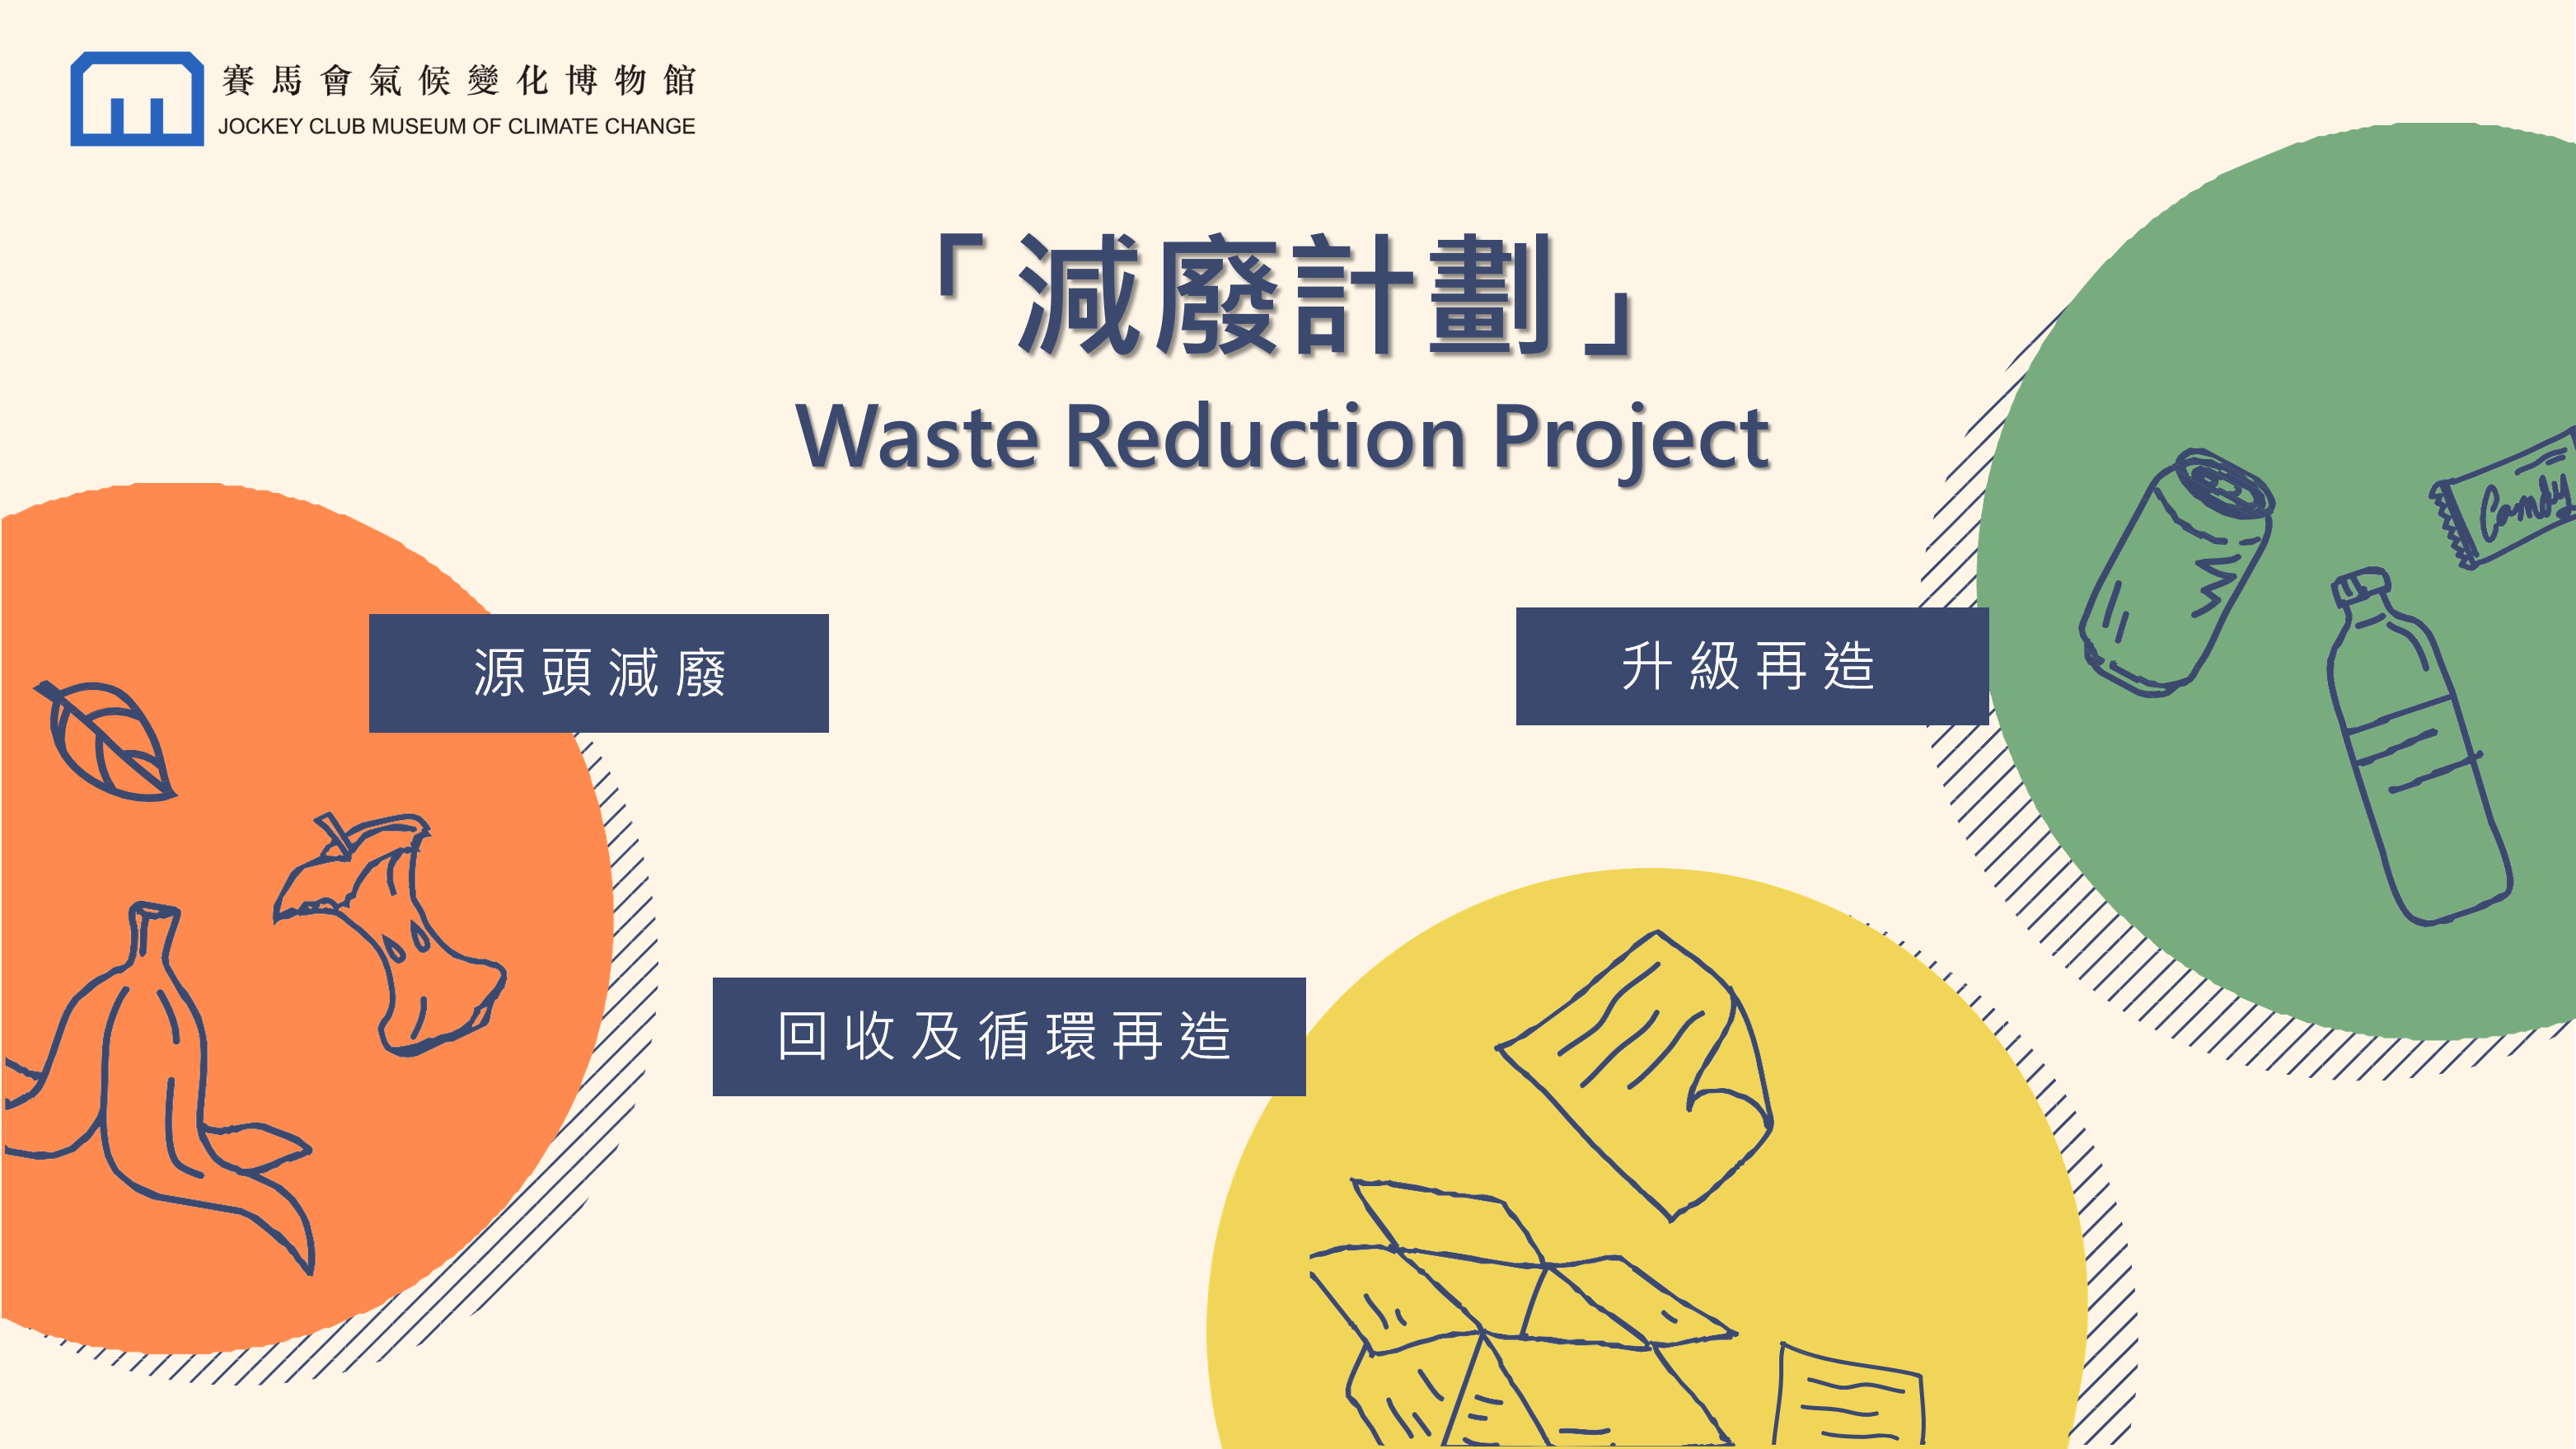 Waste Reduction Project